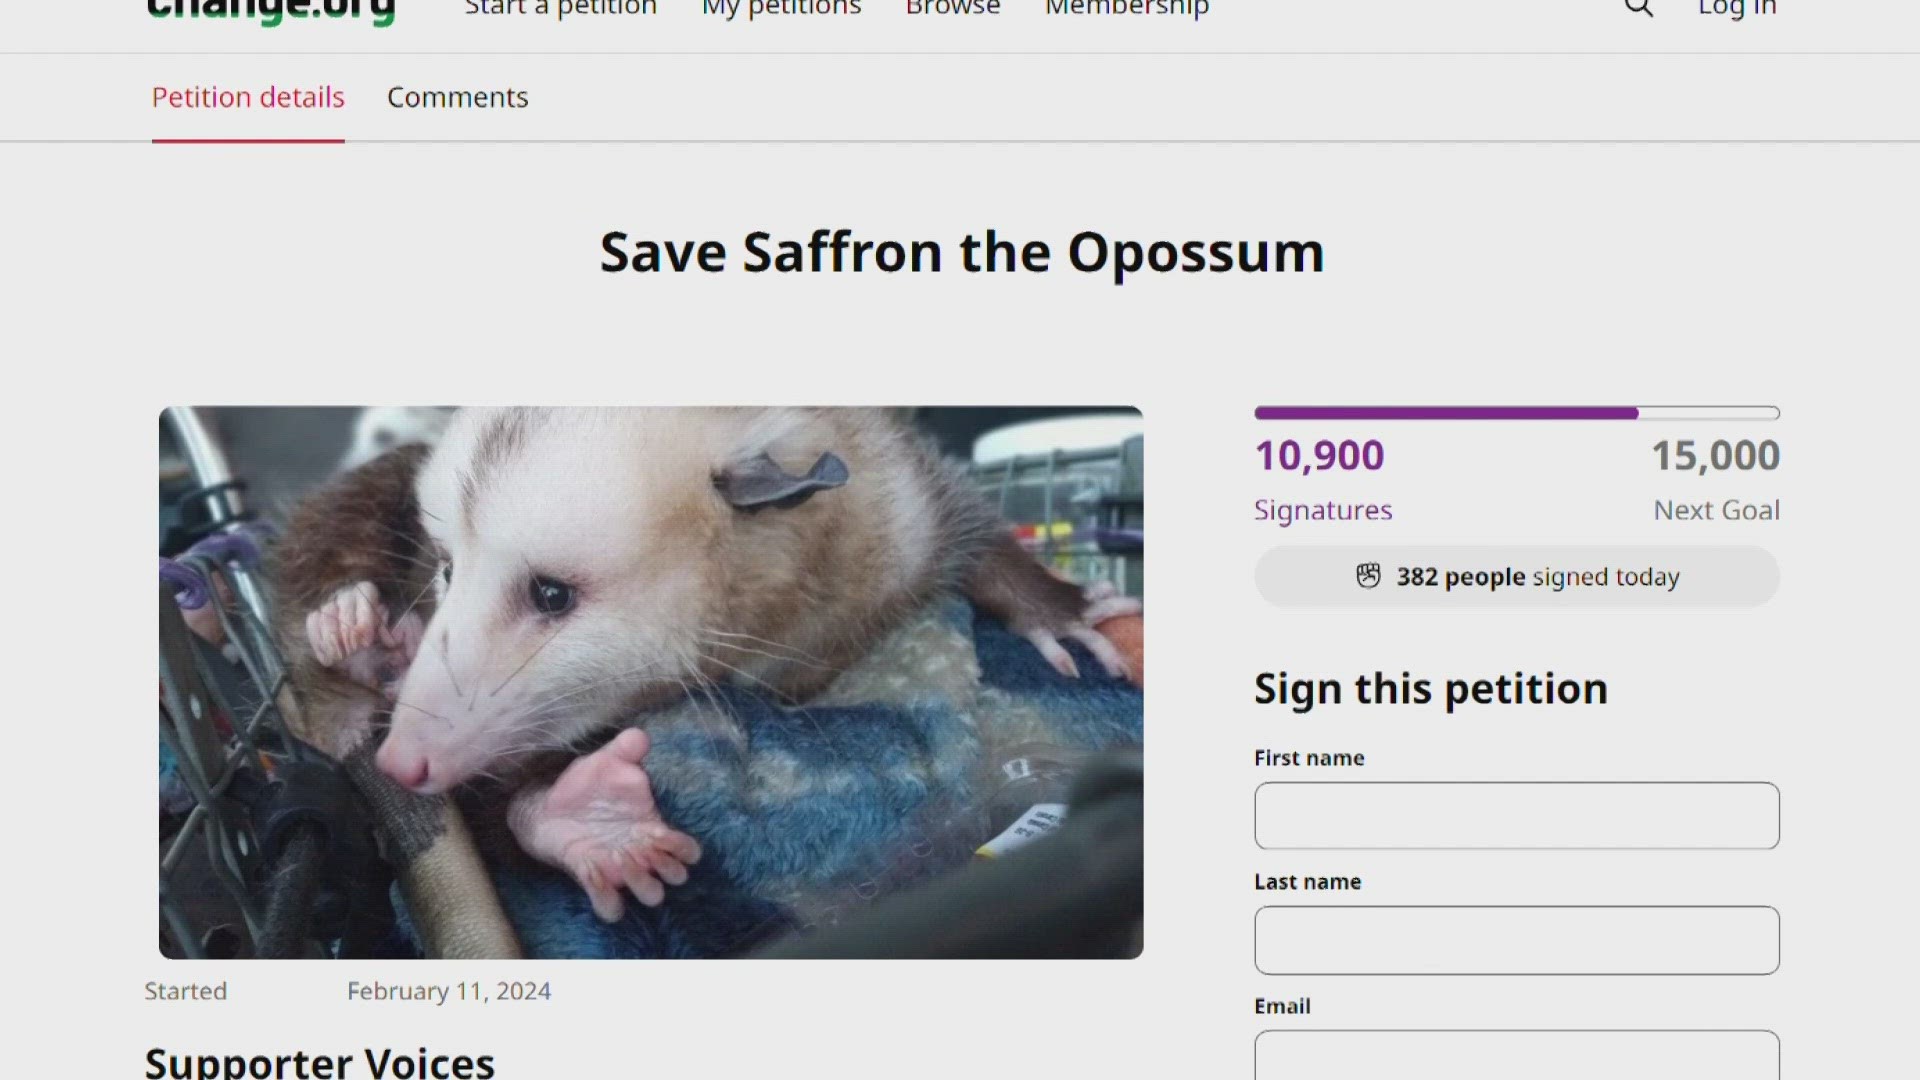 Voiles just wants to be reunited with his pet. As of Wednesday afternoon, an online petition to “Save Saffron” had gotten nearly 11,000 signatures.